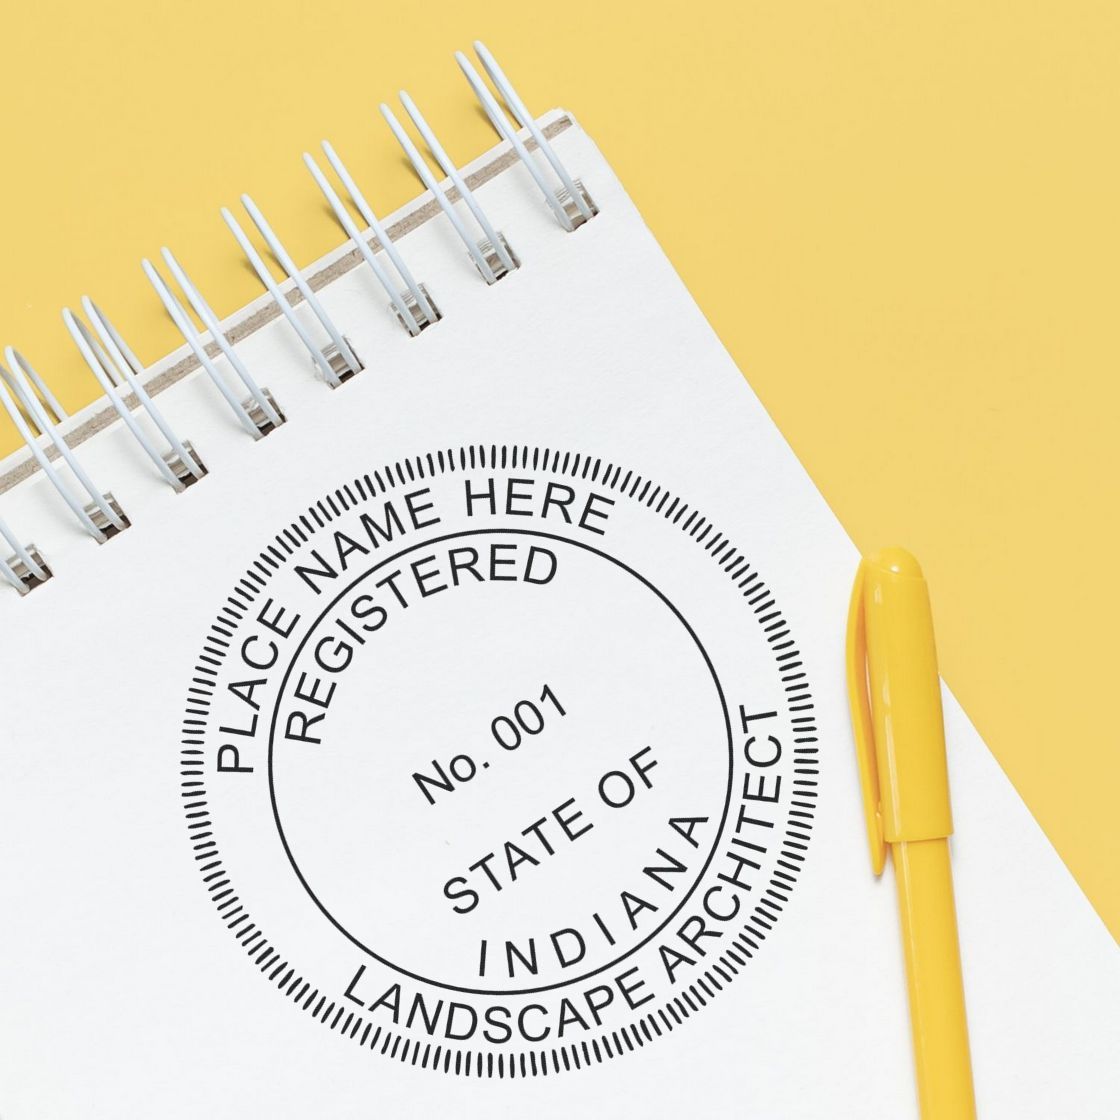 This paper is stamped with a sample imprint of the Slim Pre-Inked Indiana Landscape Architect Seal Stamp, signifying its quality and reliability.